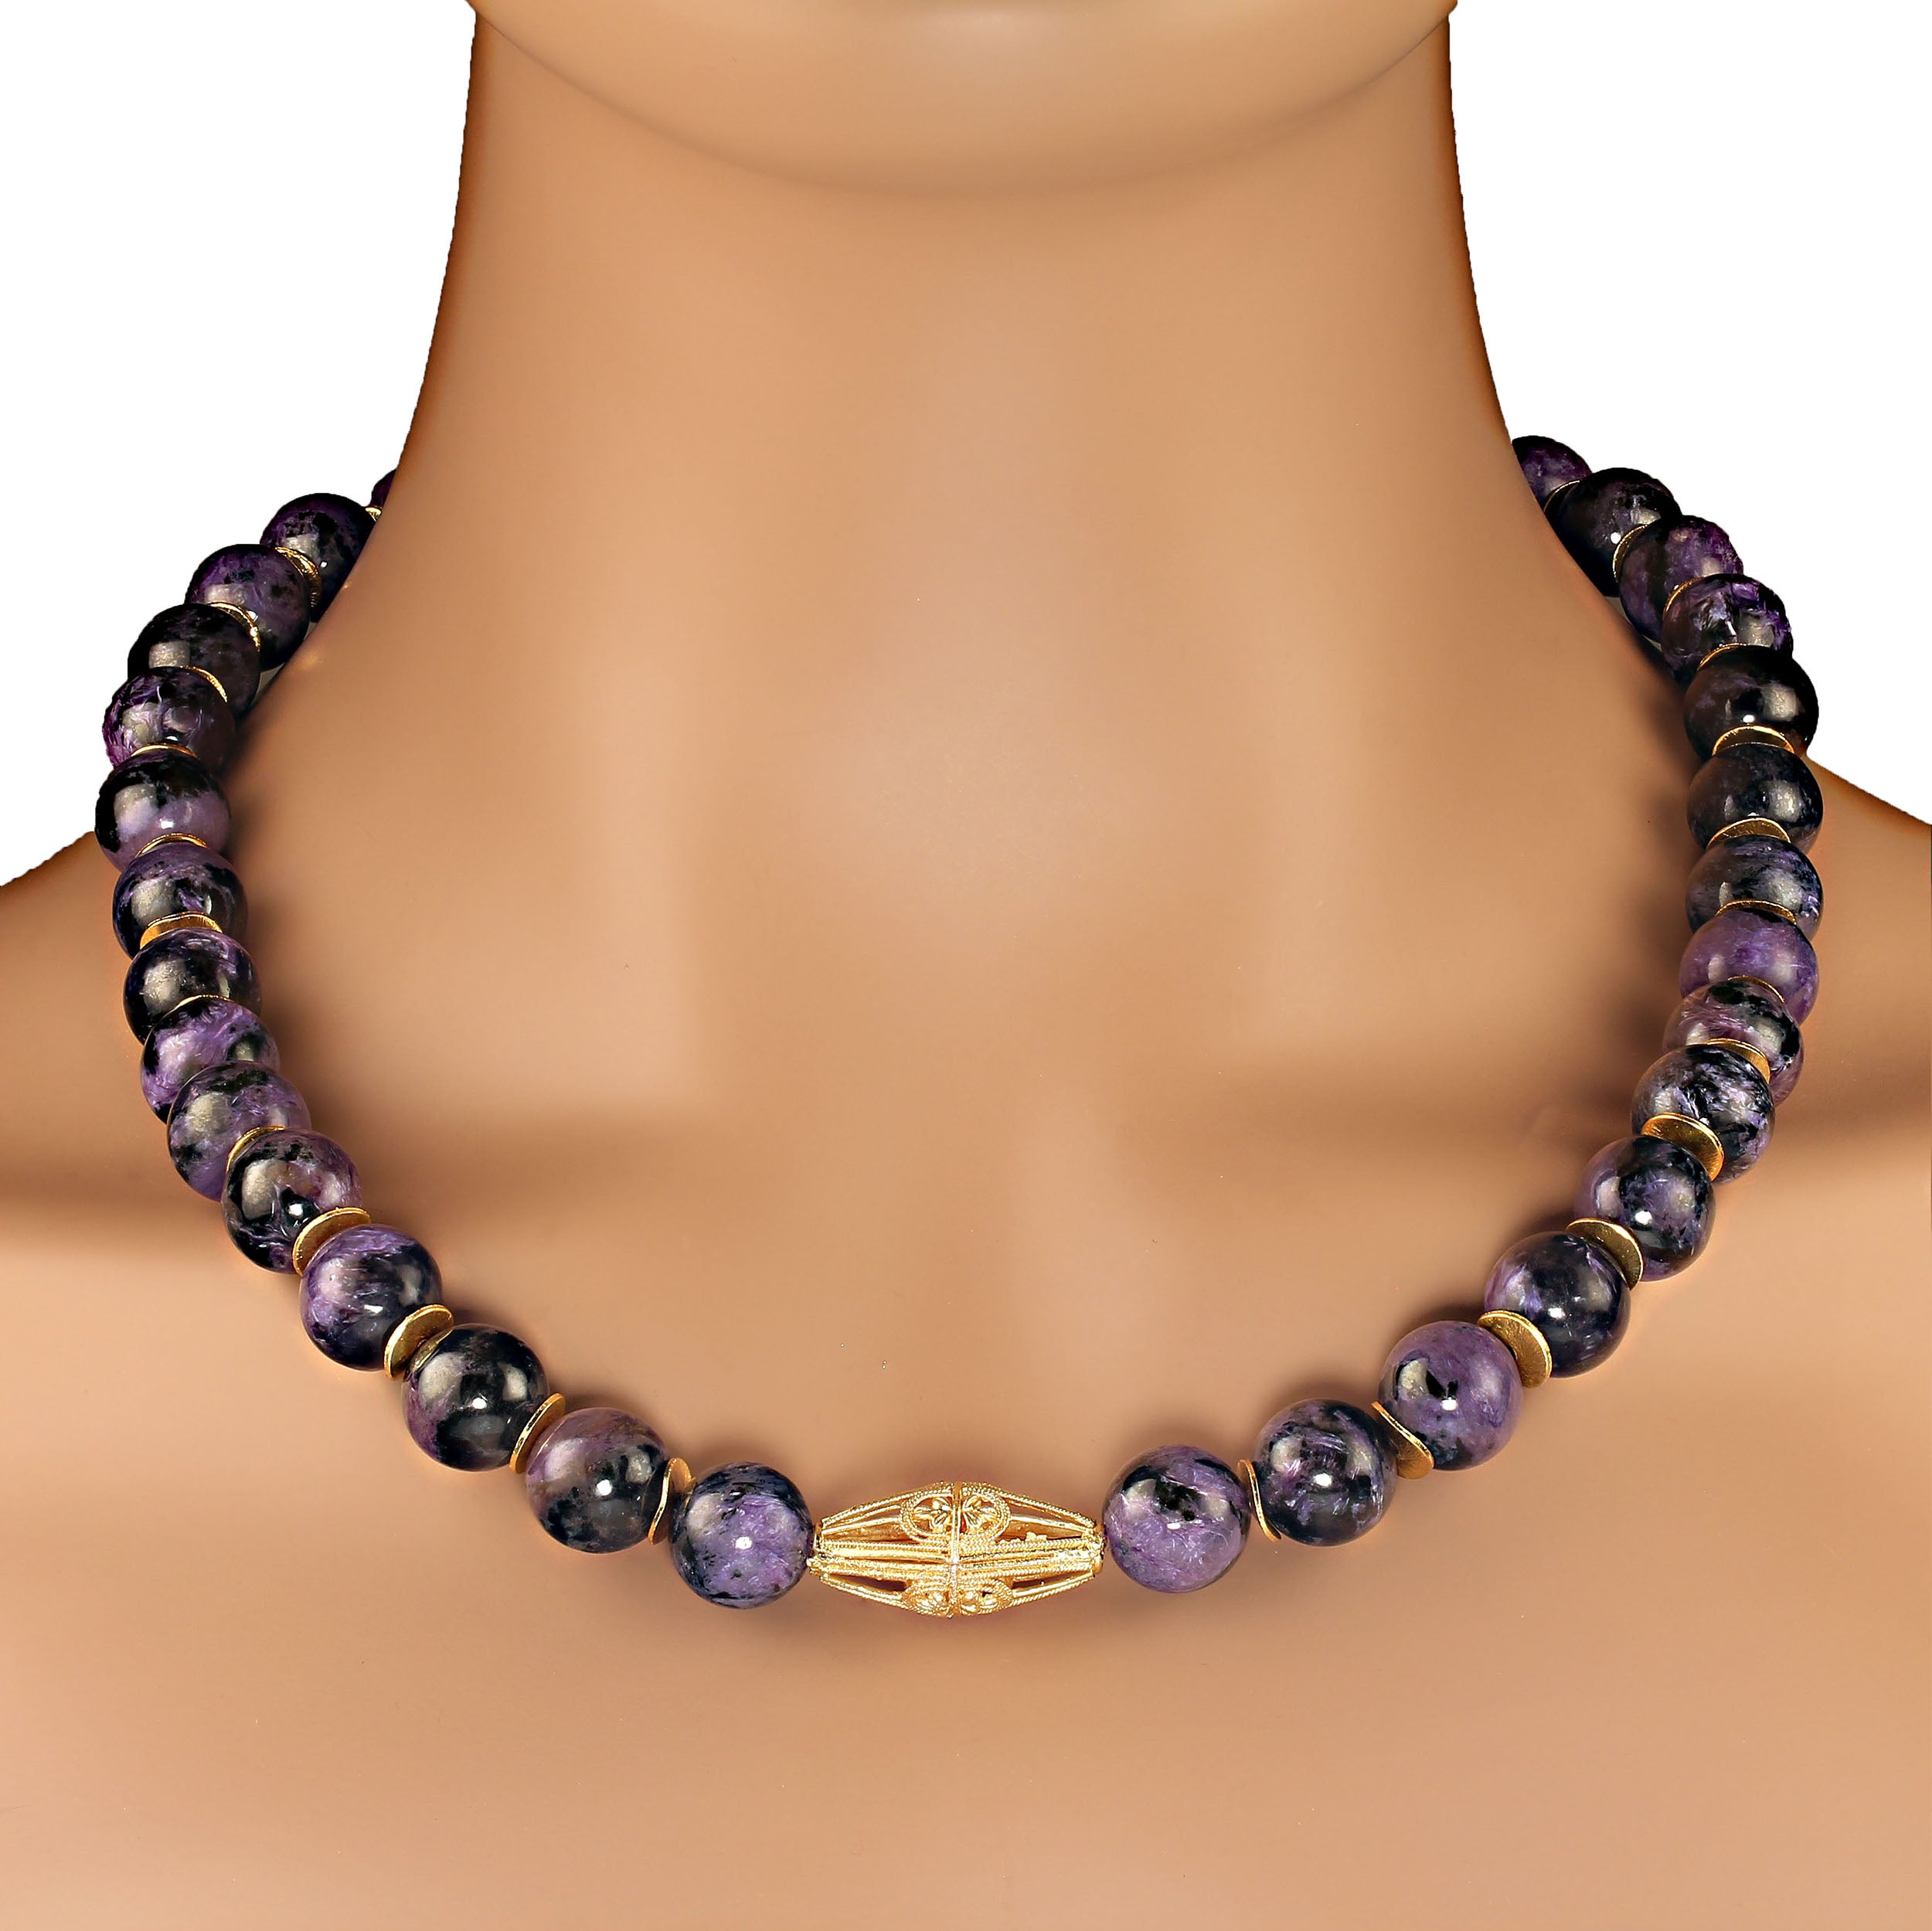 AJD 22 Inch Glowing Charoite with gold tone accents necklace     Great Gift! For Sale